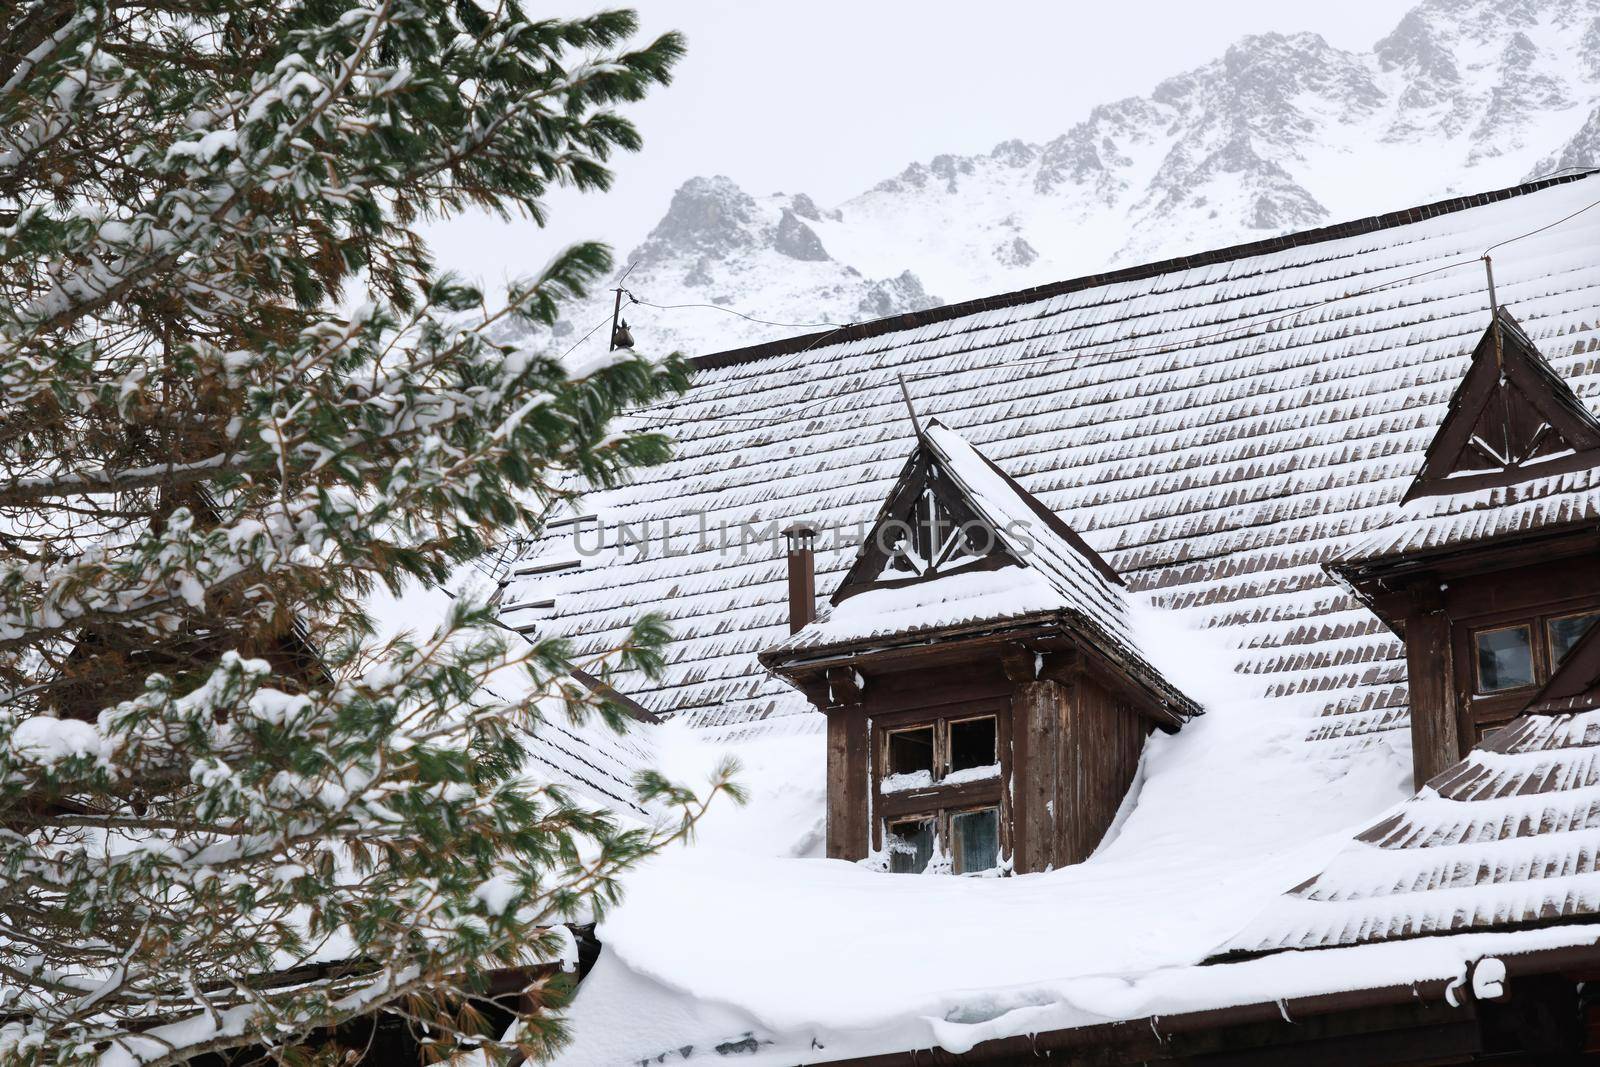 The snow-covered roof of the old wooden house in mountains